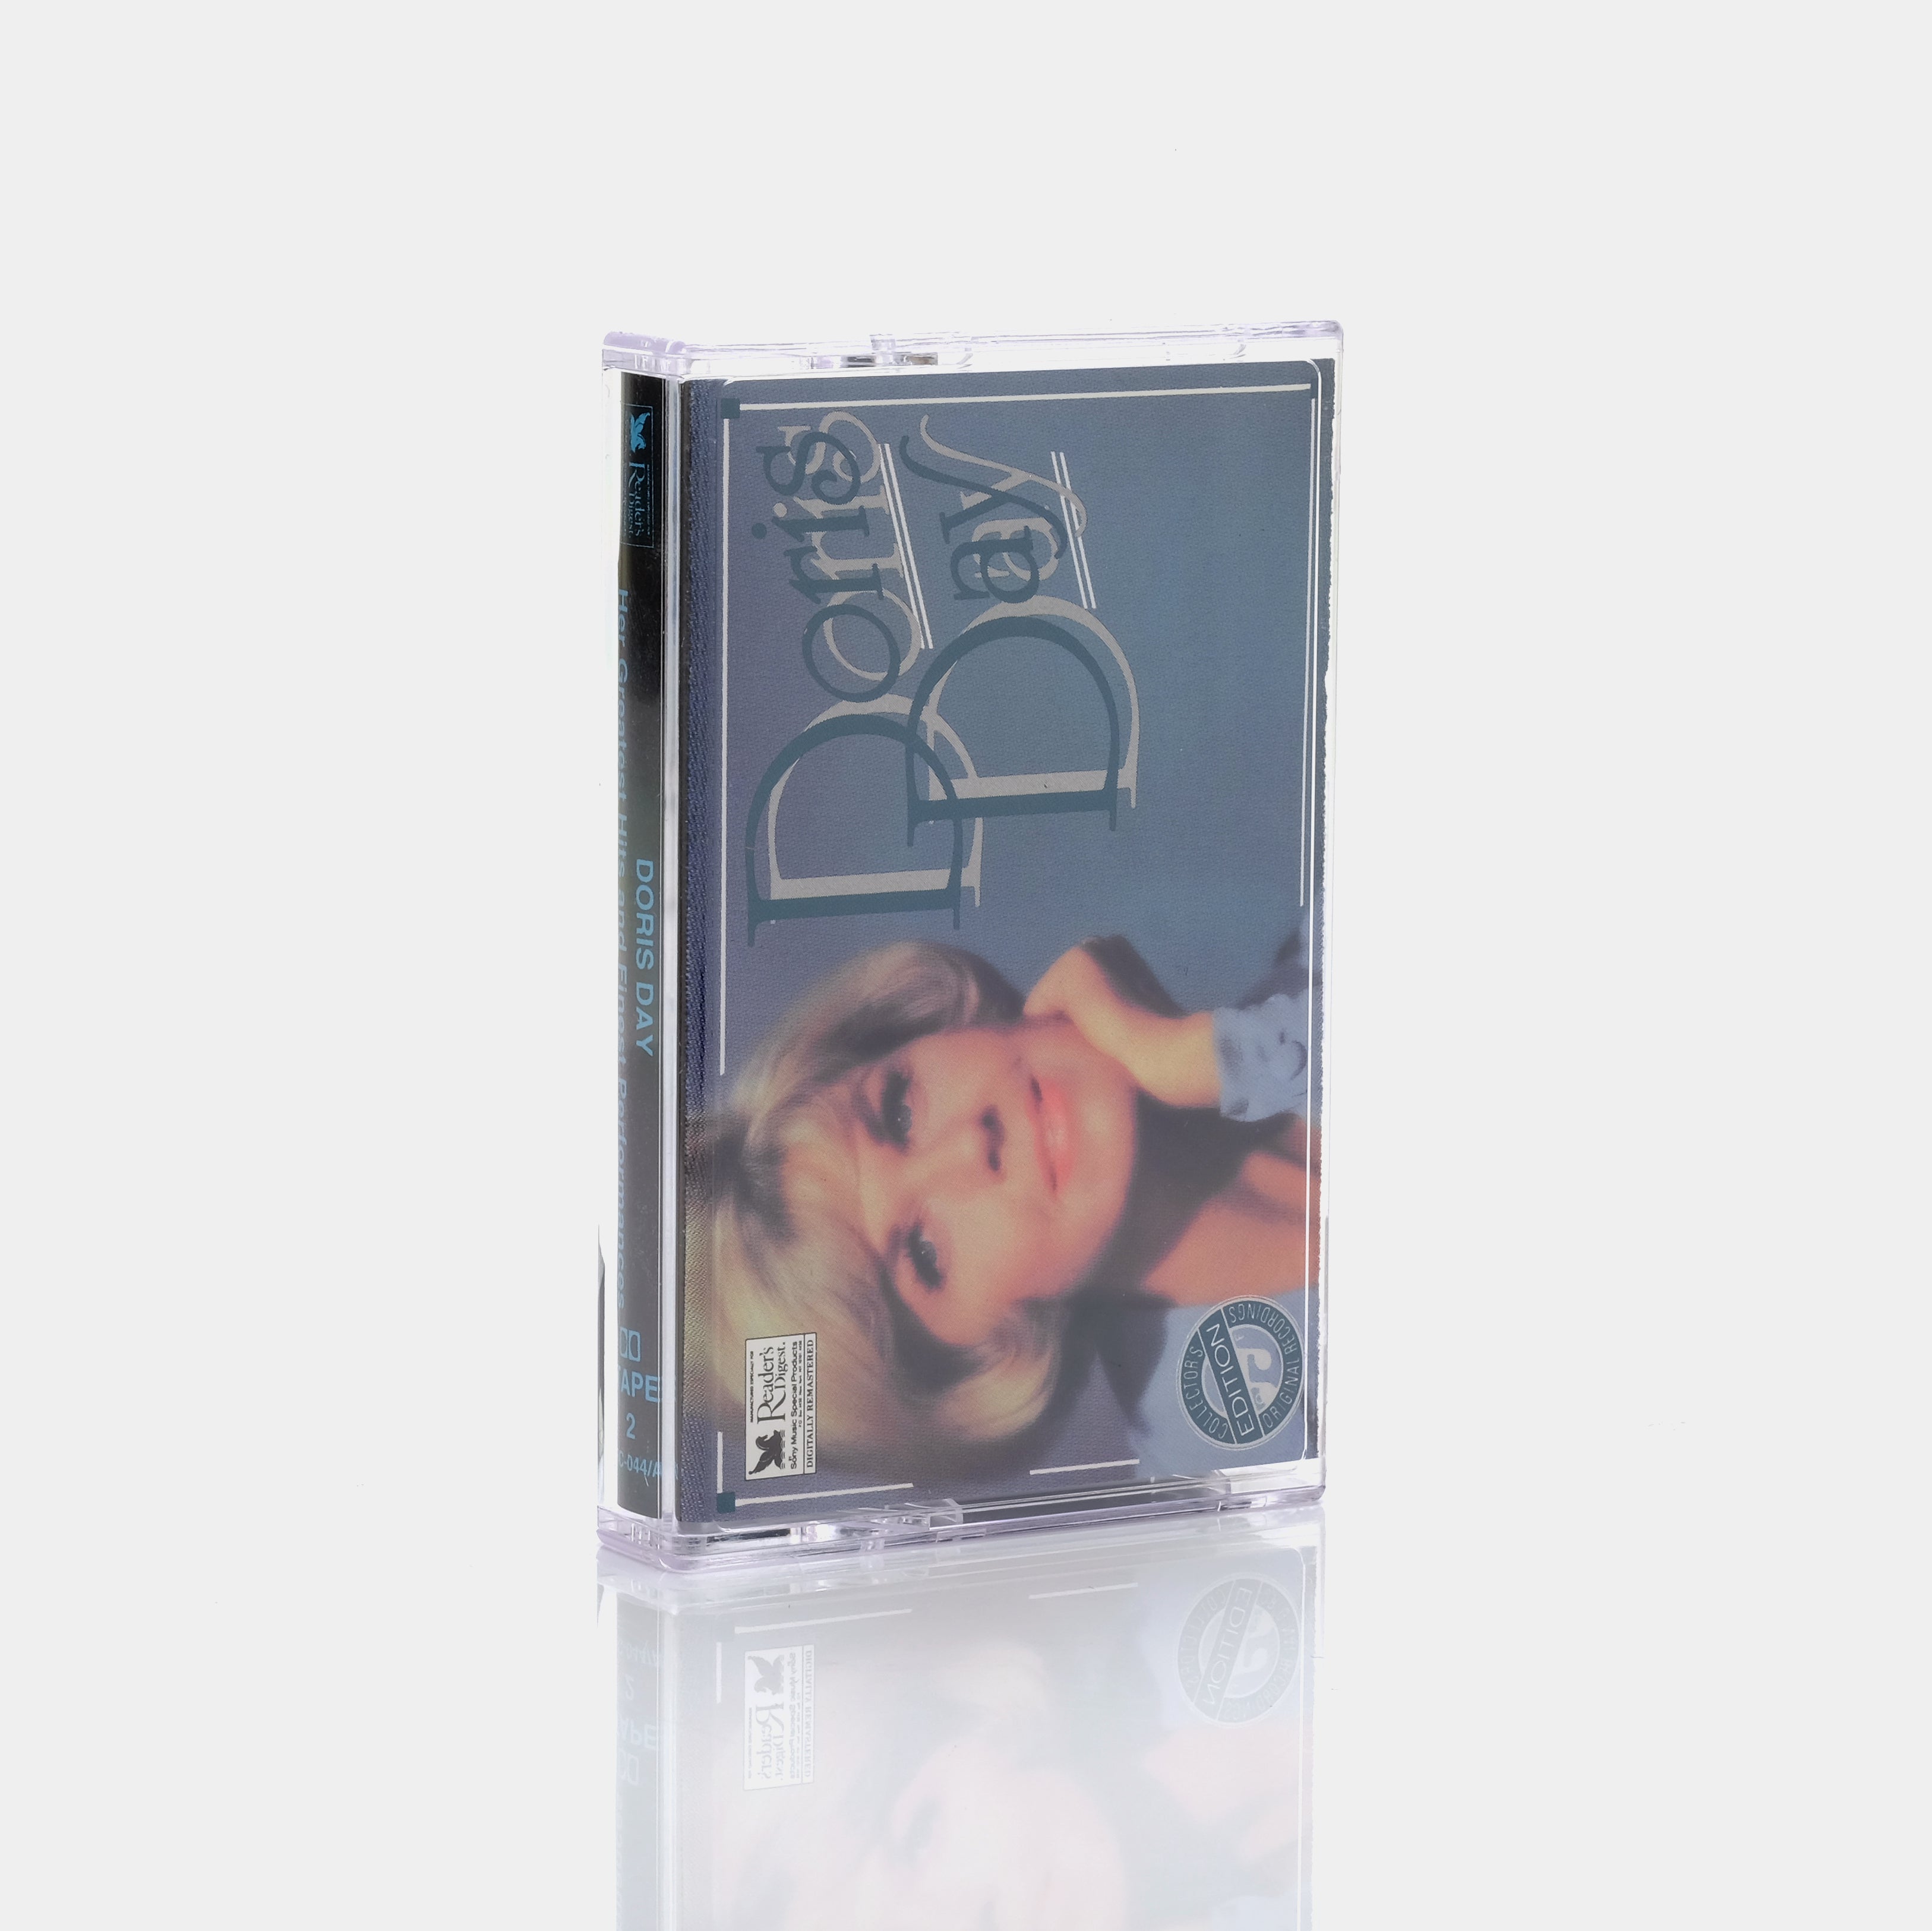 Doris Day - Her Greatest Hits and Finest Performances (Tape 1) Cassette Tape